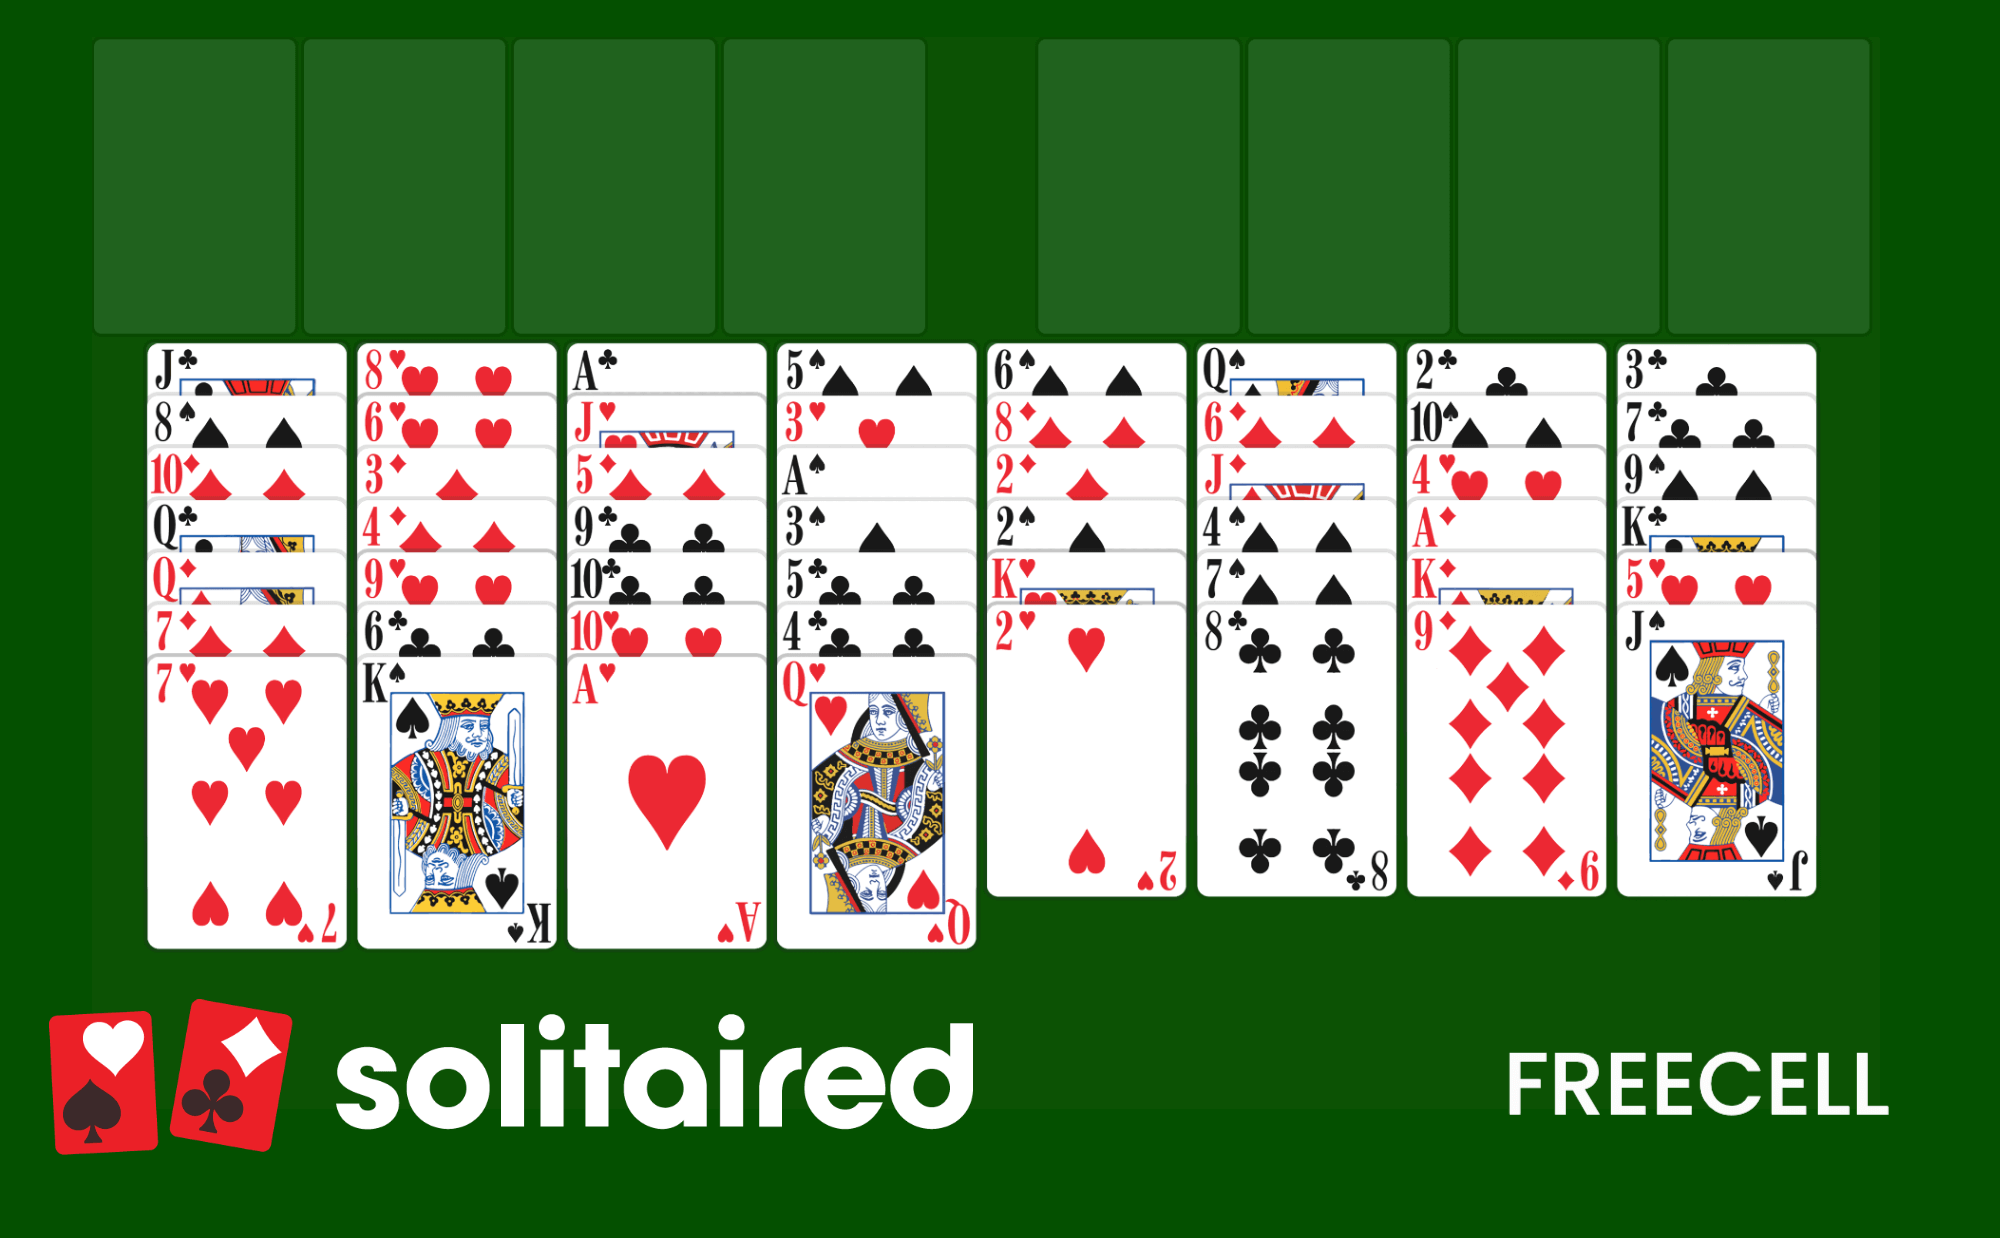 online freecell solitaire games